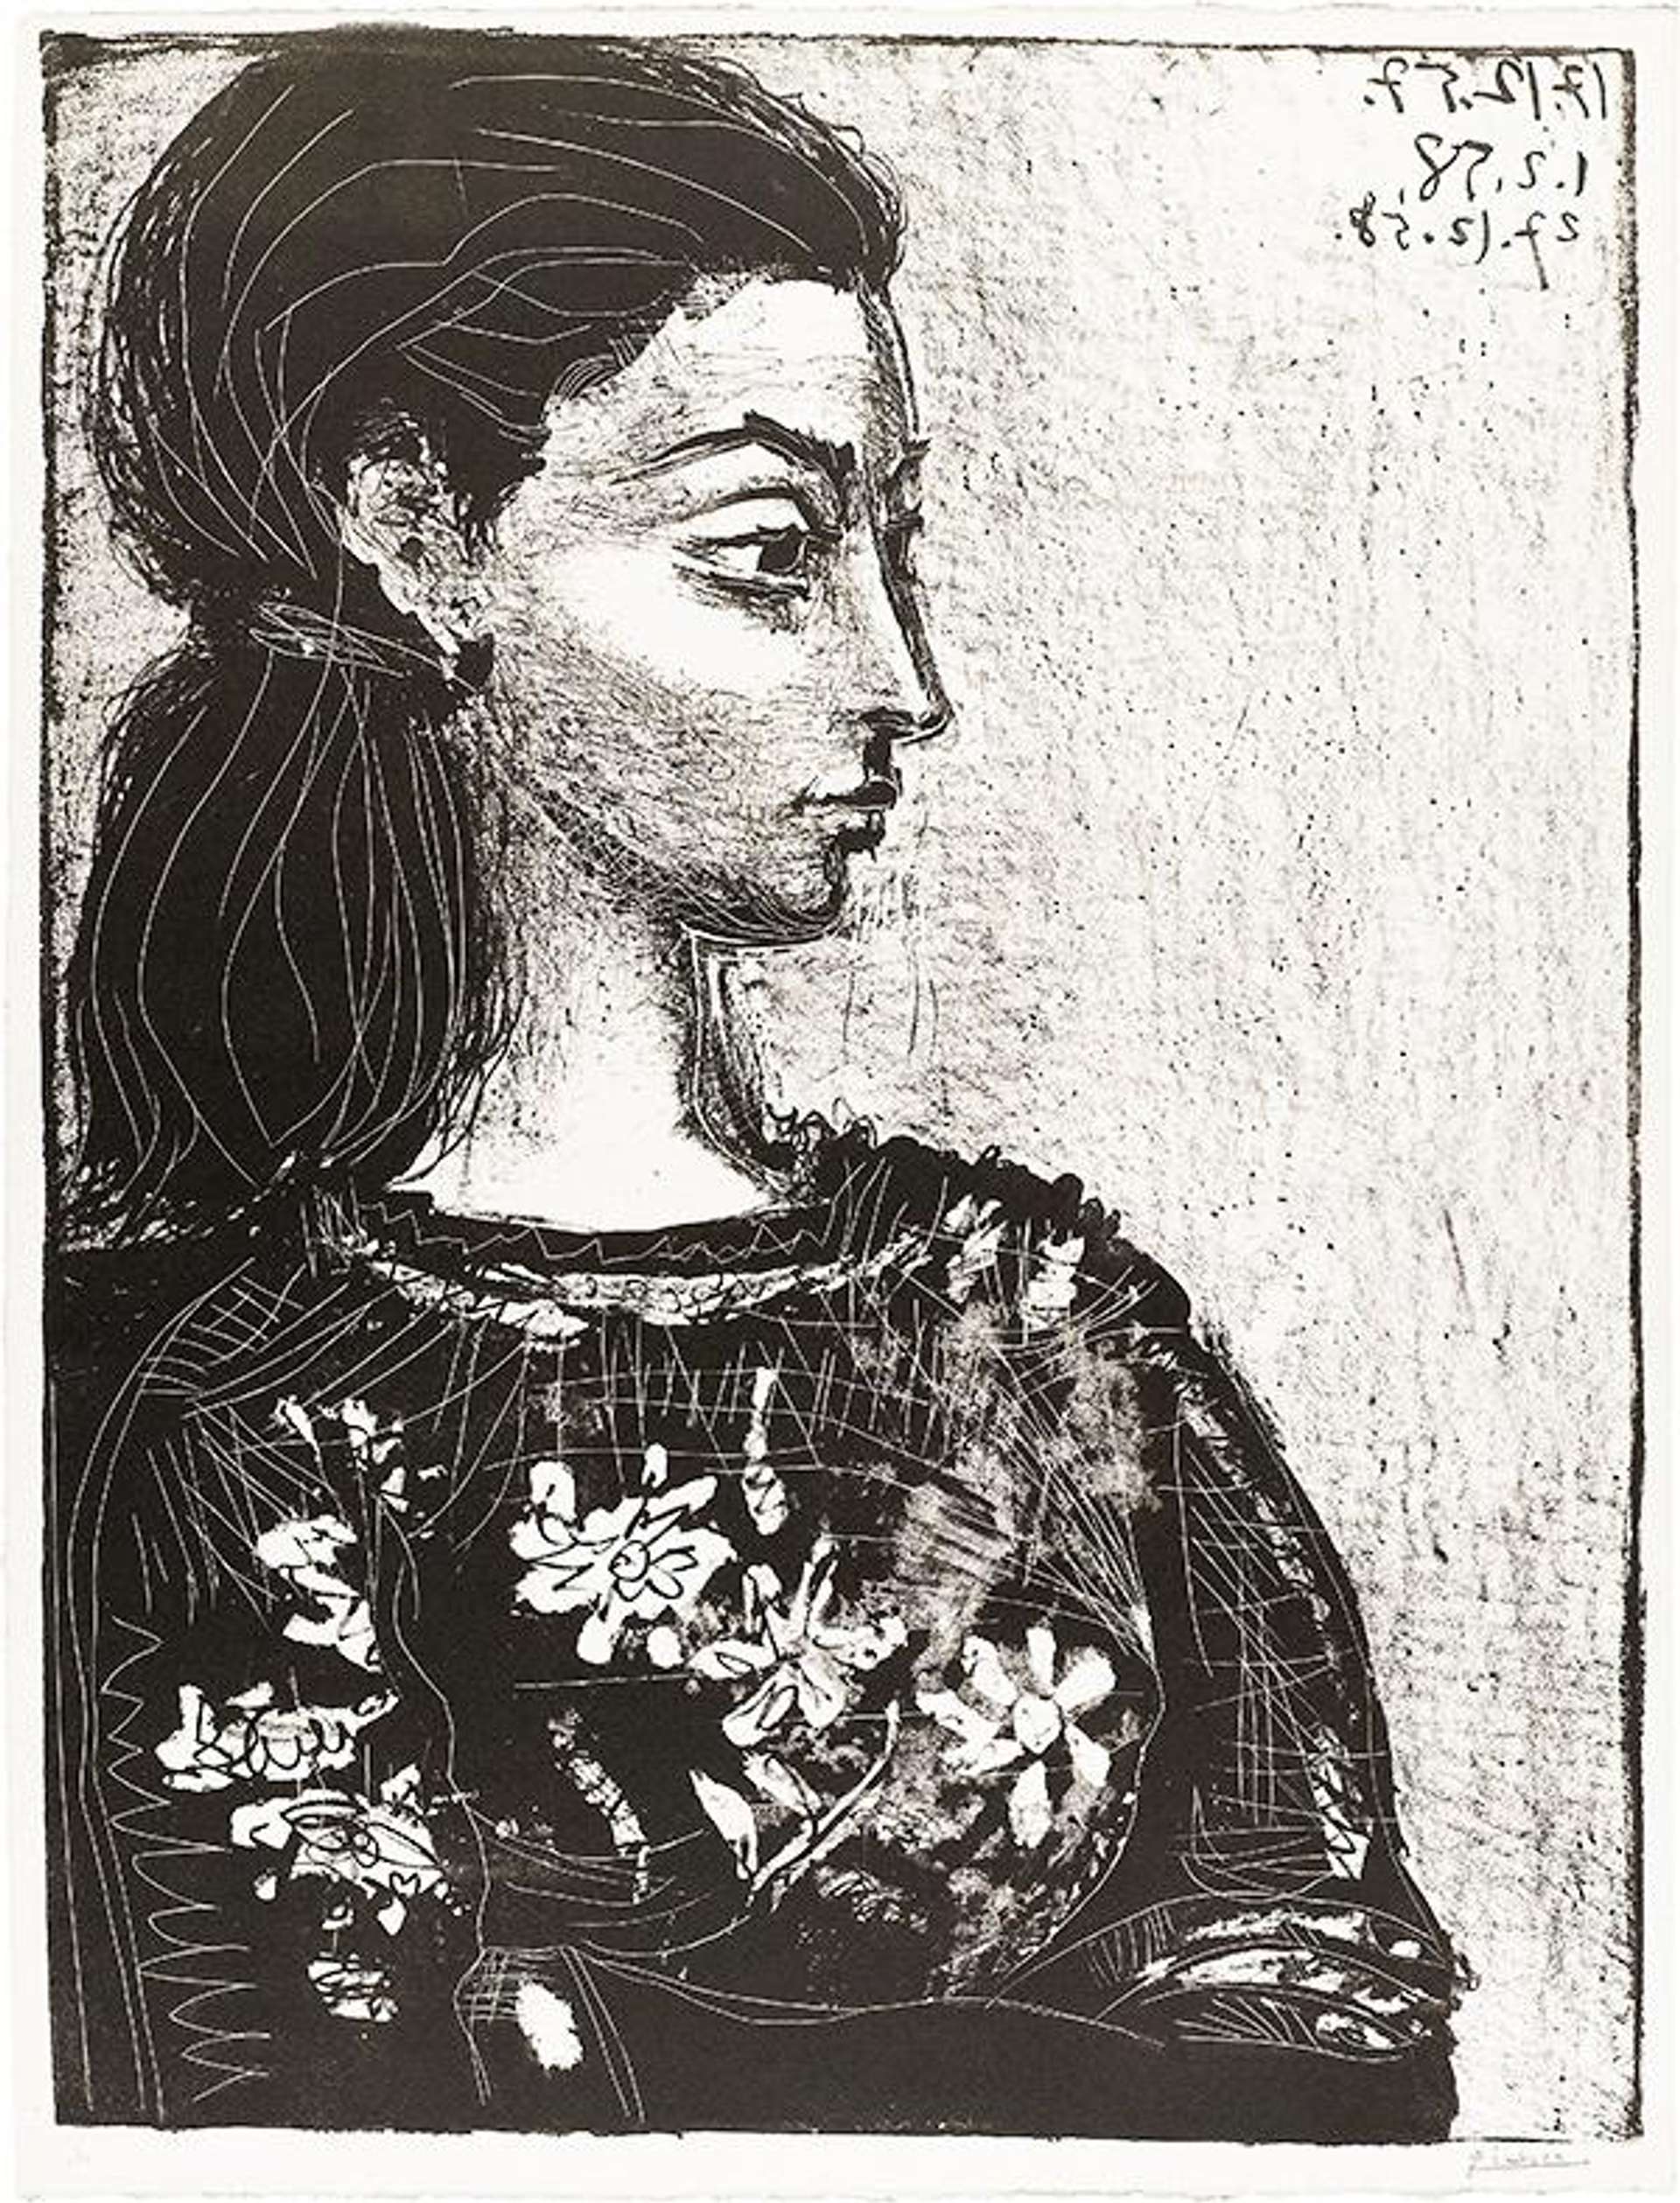 An image of the print Femme Au Corsage À Fleurs by Pablo Picasso. It is done in black and white, and shows a woman's side profile white she presses flowers against her bosom.